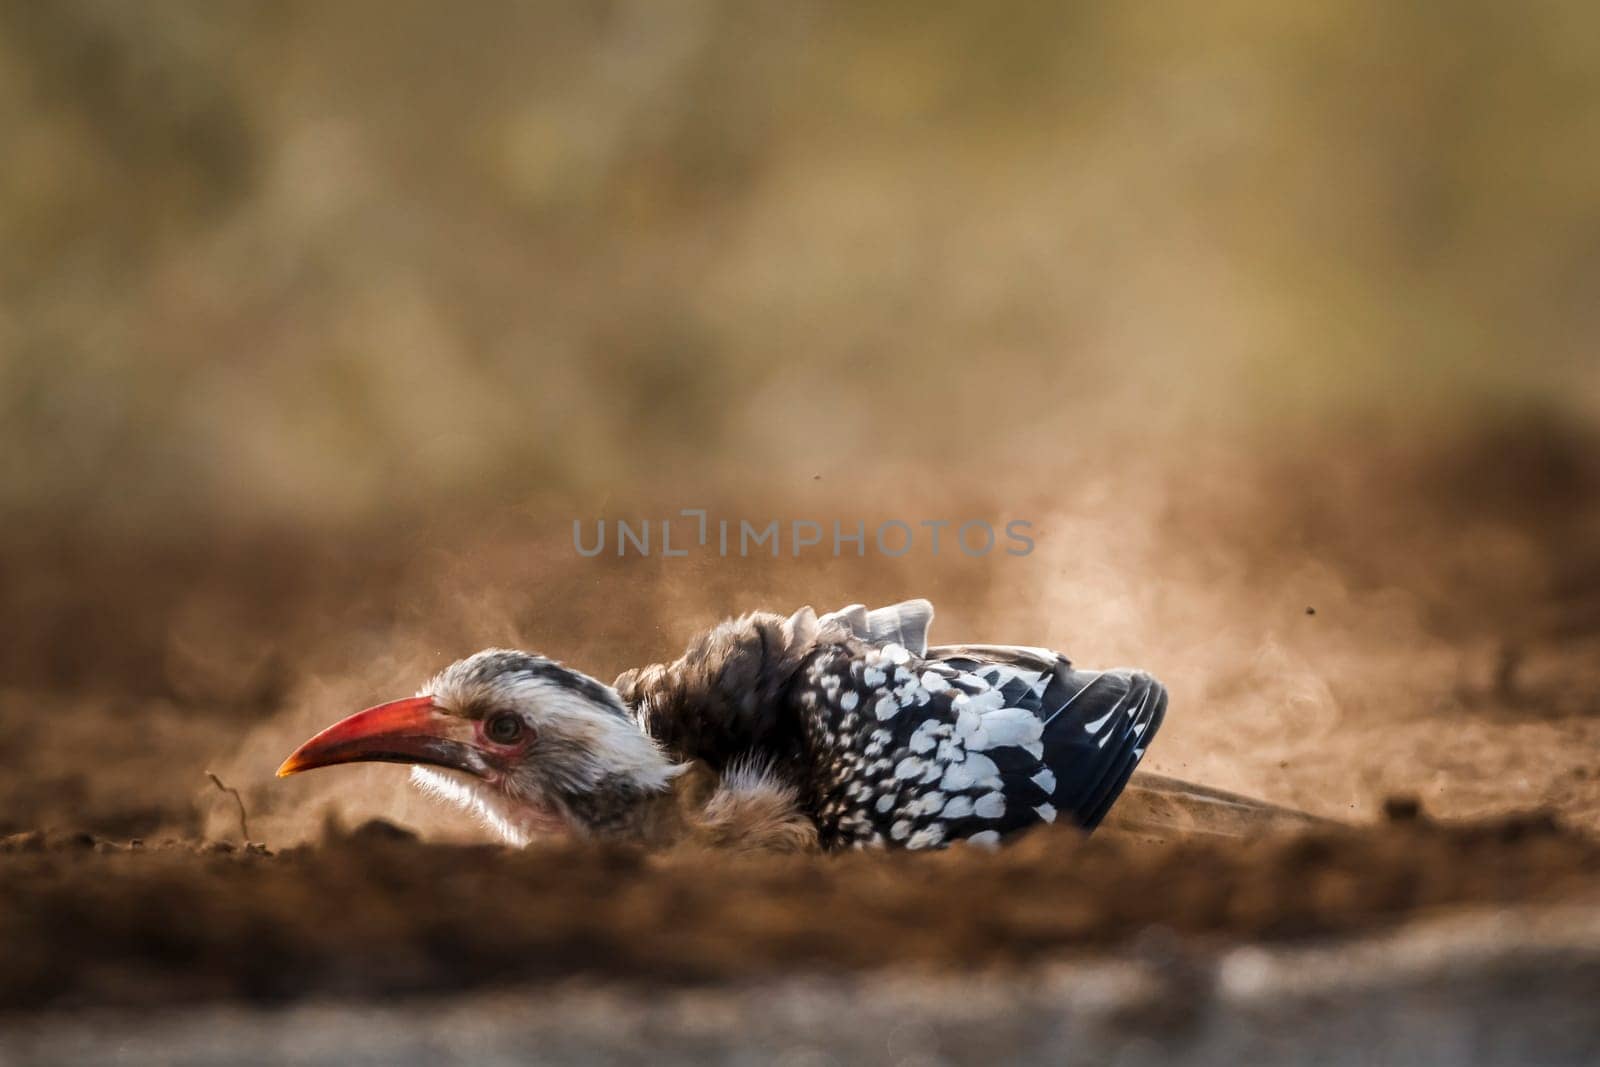 Southern Red billed Hornbill grooming in sand at dawn in Kruger National park, South Africa ; Specie Tockus rufirostris family of Bucerotidae